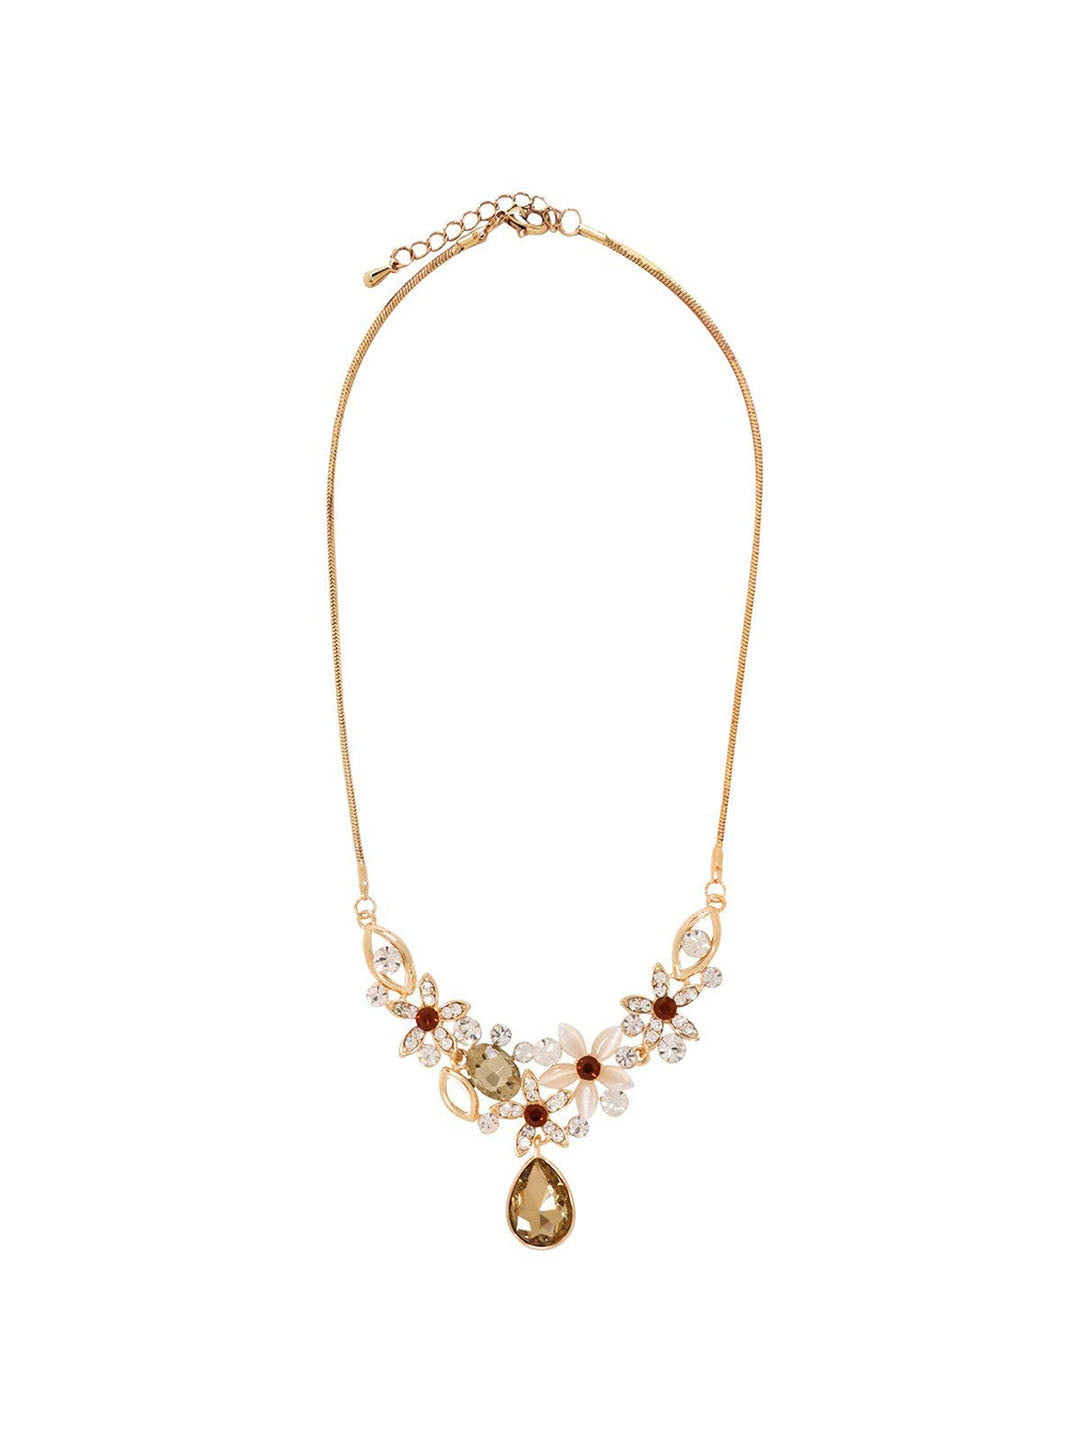 Brown & Cream Stones Gold Plated Floral Necklace